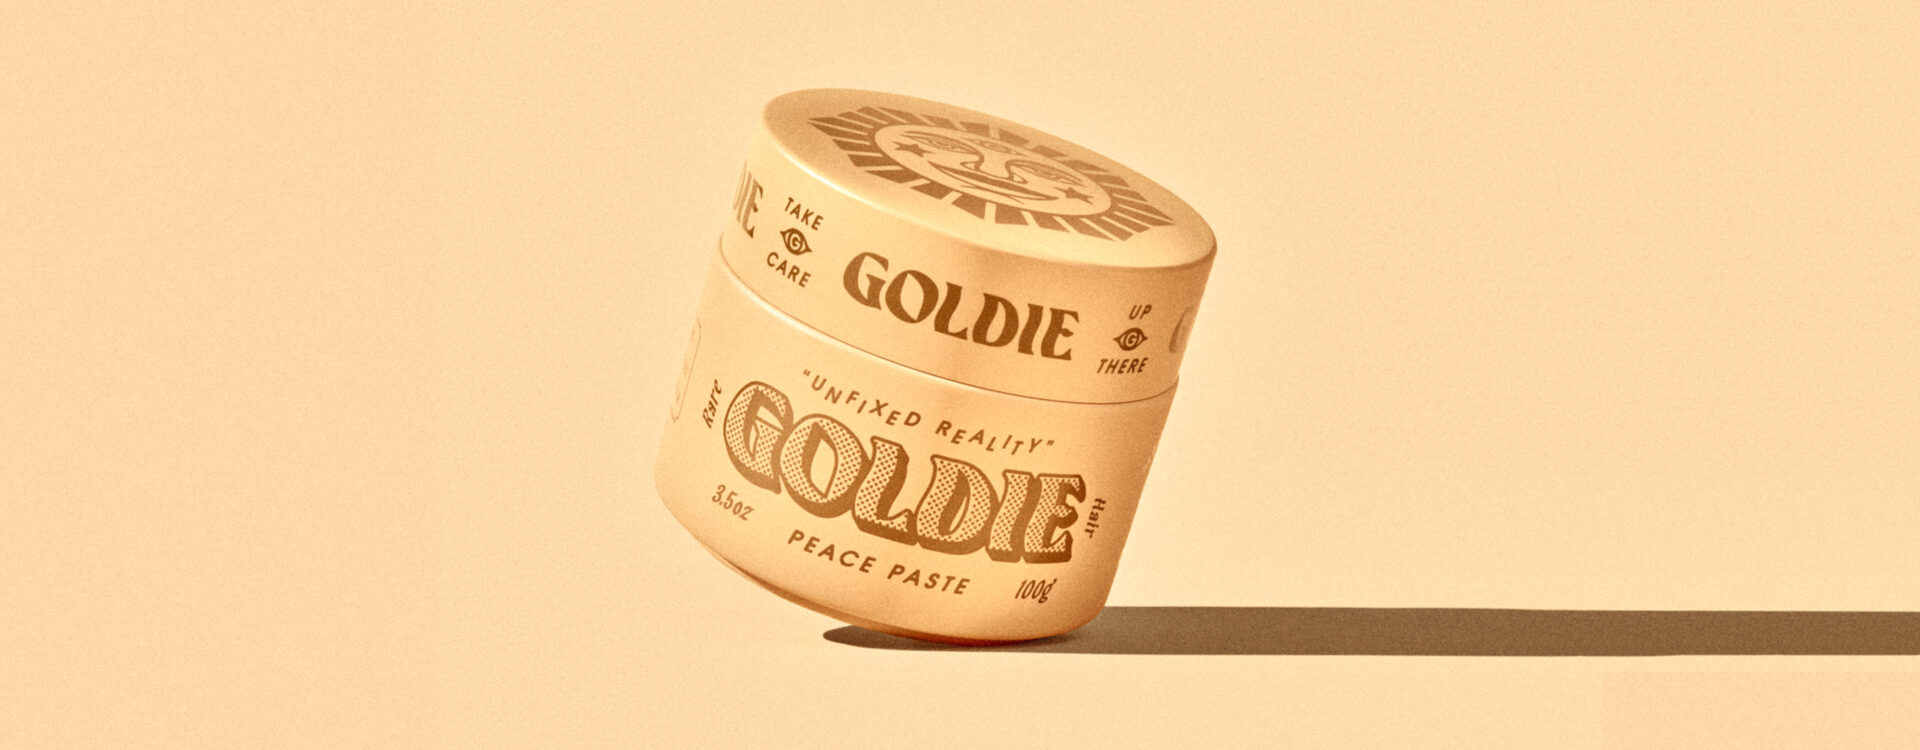 Goldie Provisions